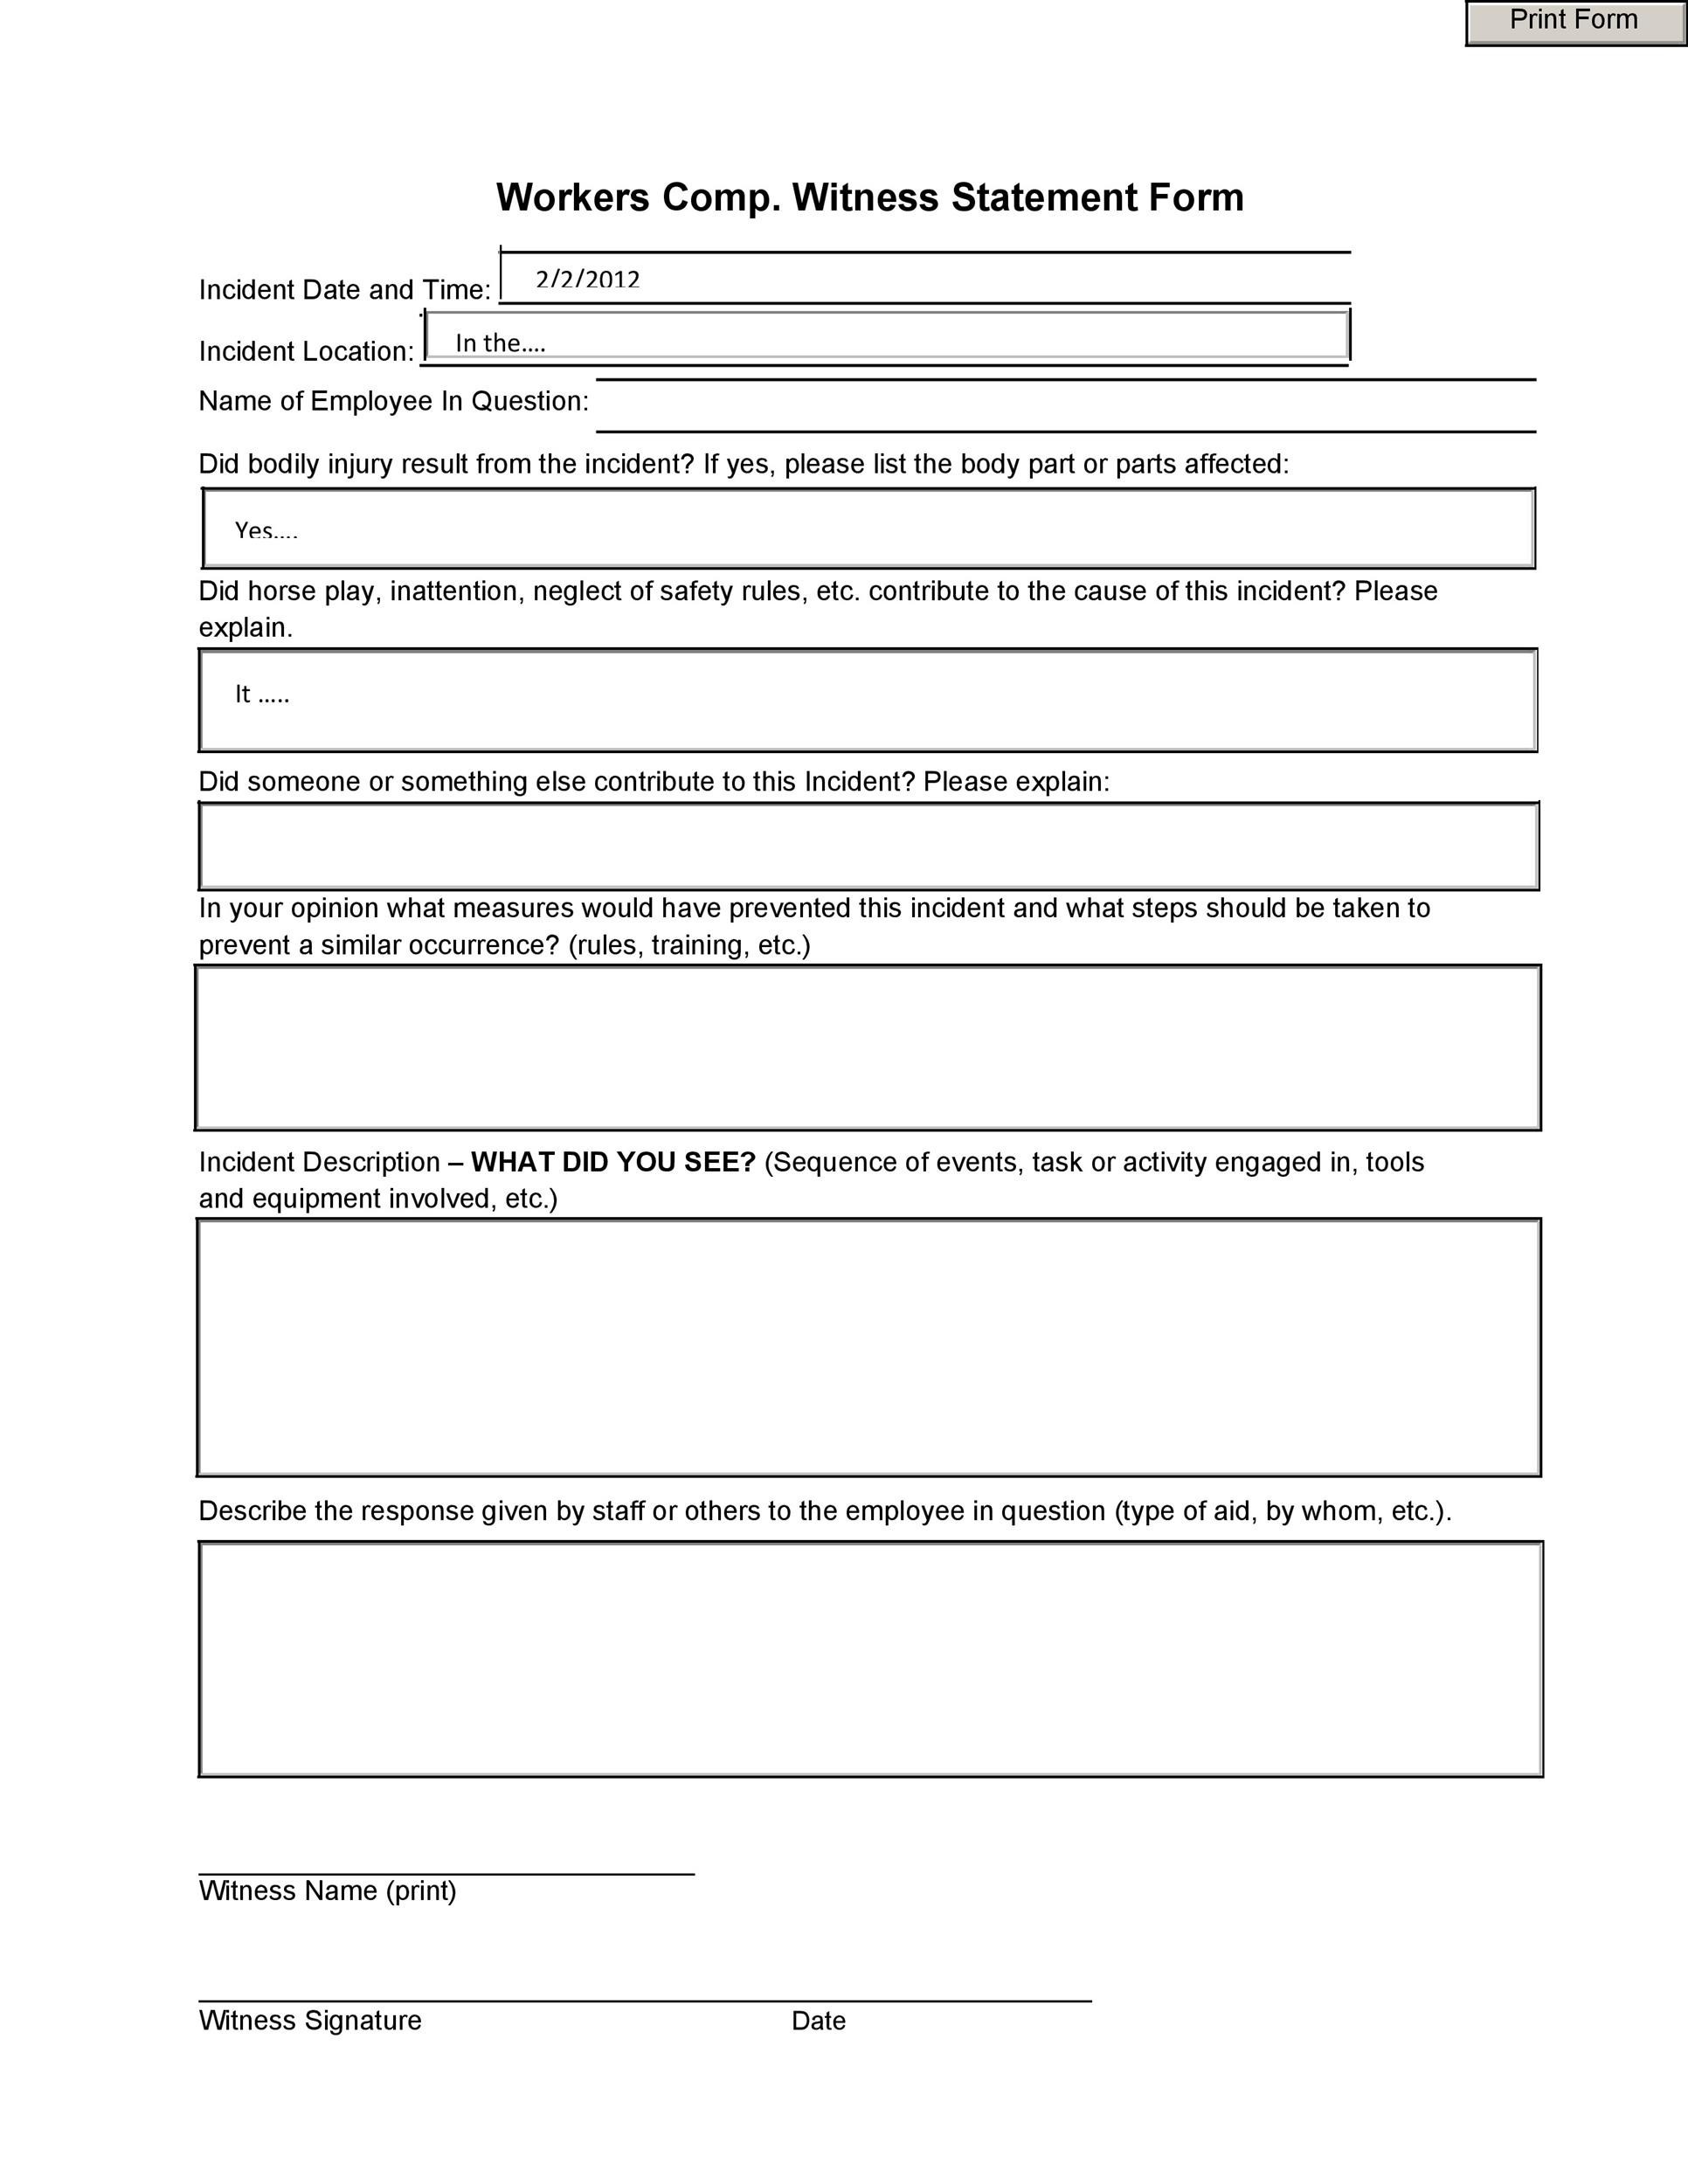 50 Professional Witness Statement Forms & Templates ᐅ TemplateLab